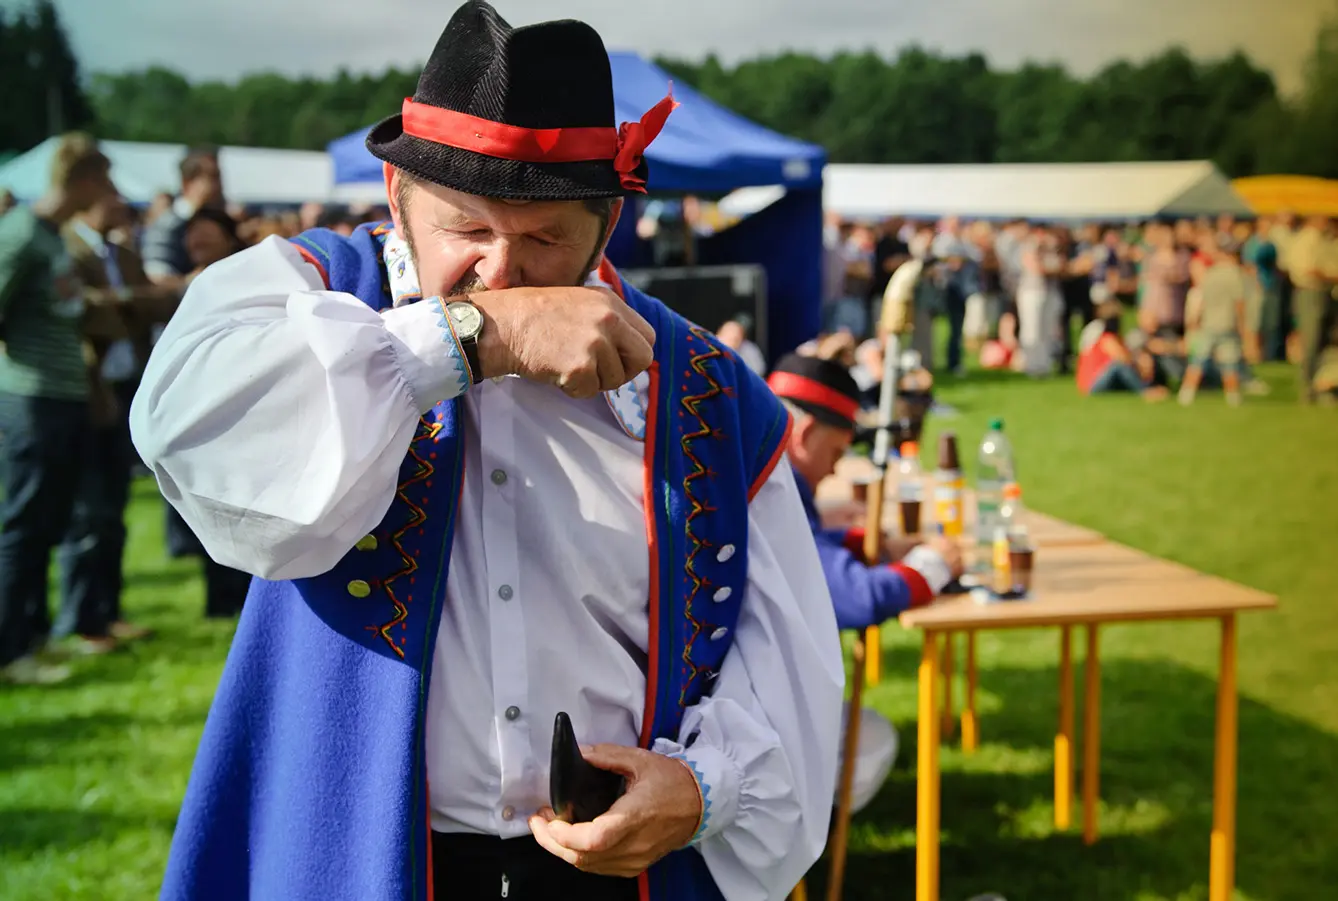 annual Poland Snuffing Championships